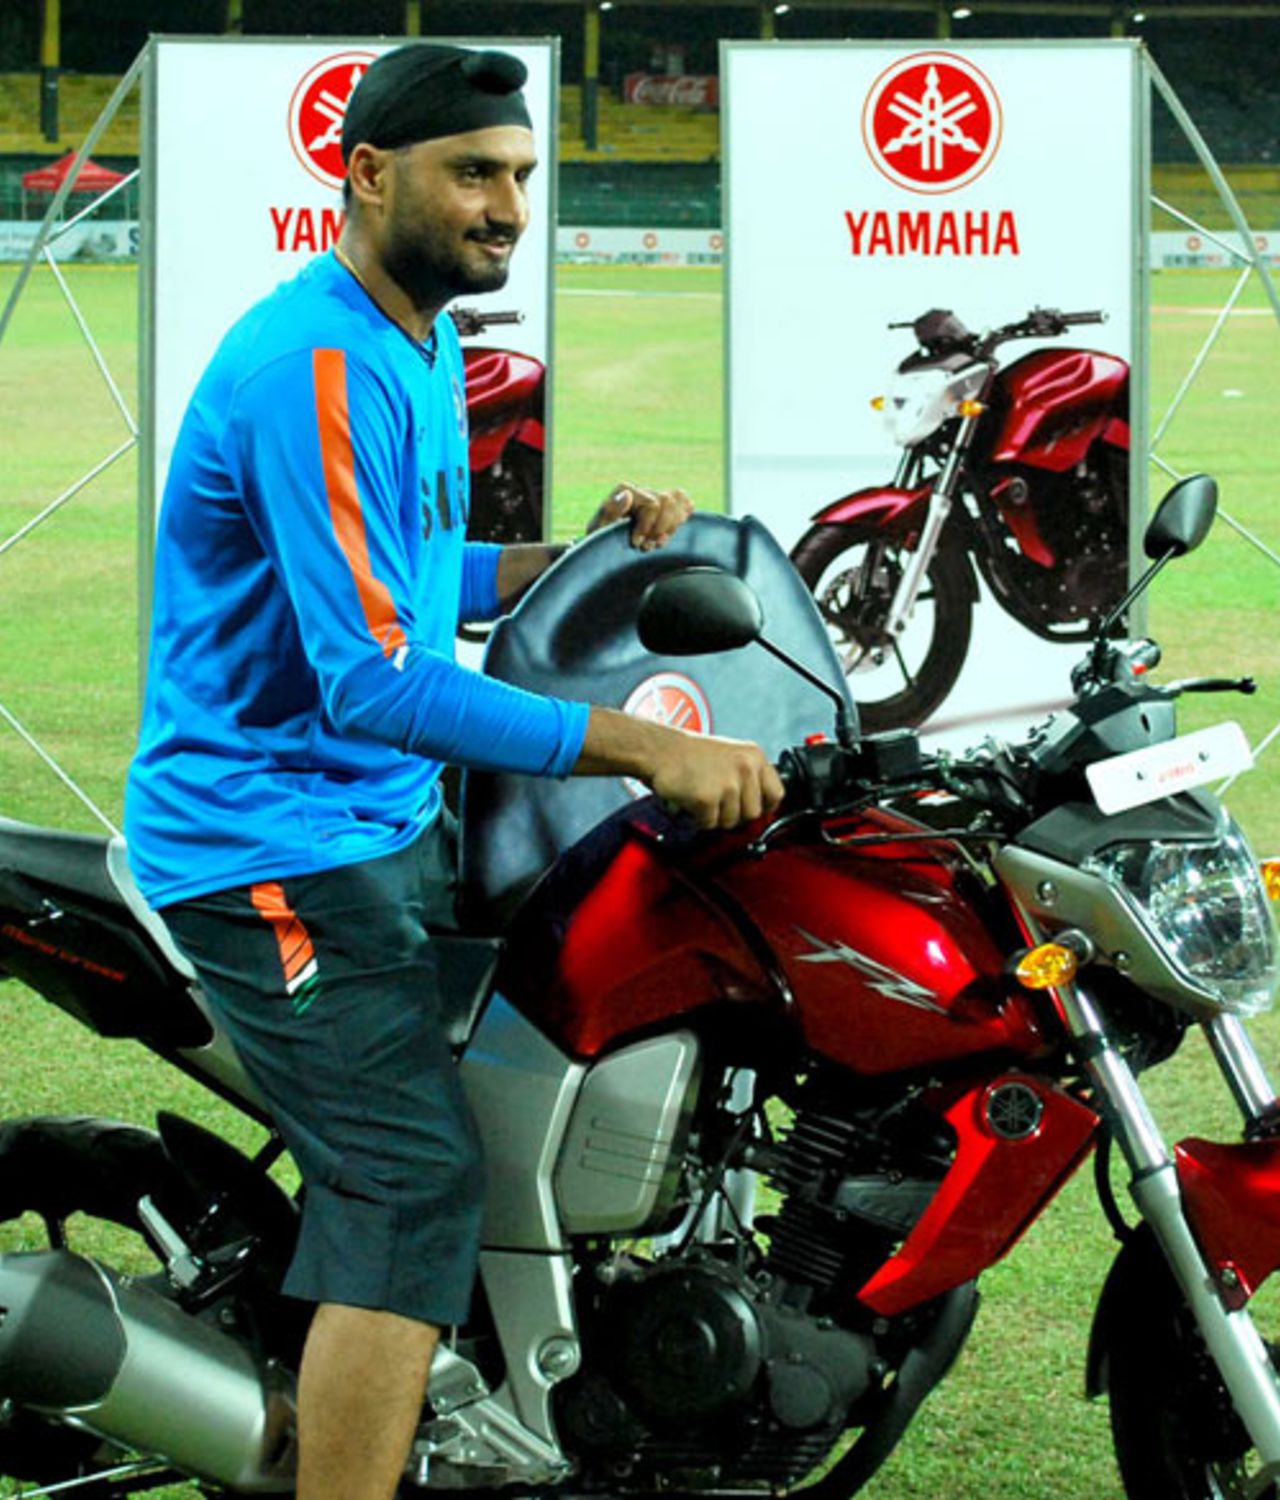 Harbhajan Singh won a motorbike for being the 'Most Stylish Player' of the day, Sri Lanka v India, Compaq Cup, final, Colombo, September 14, 2009